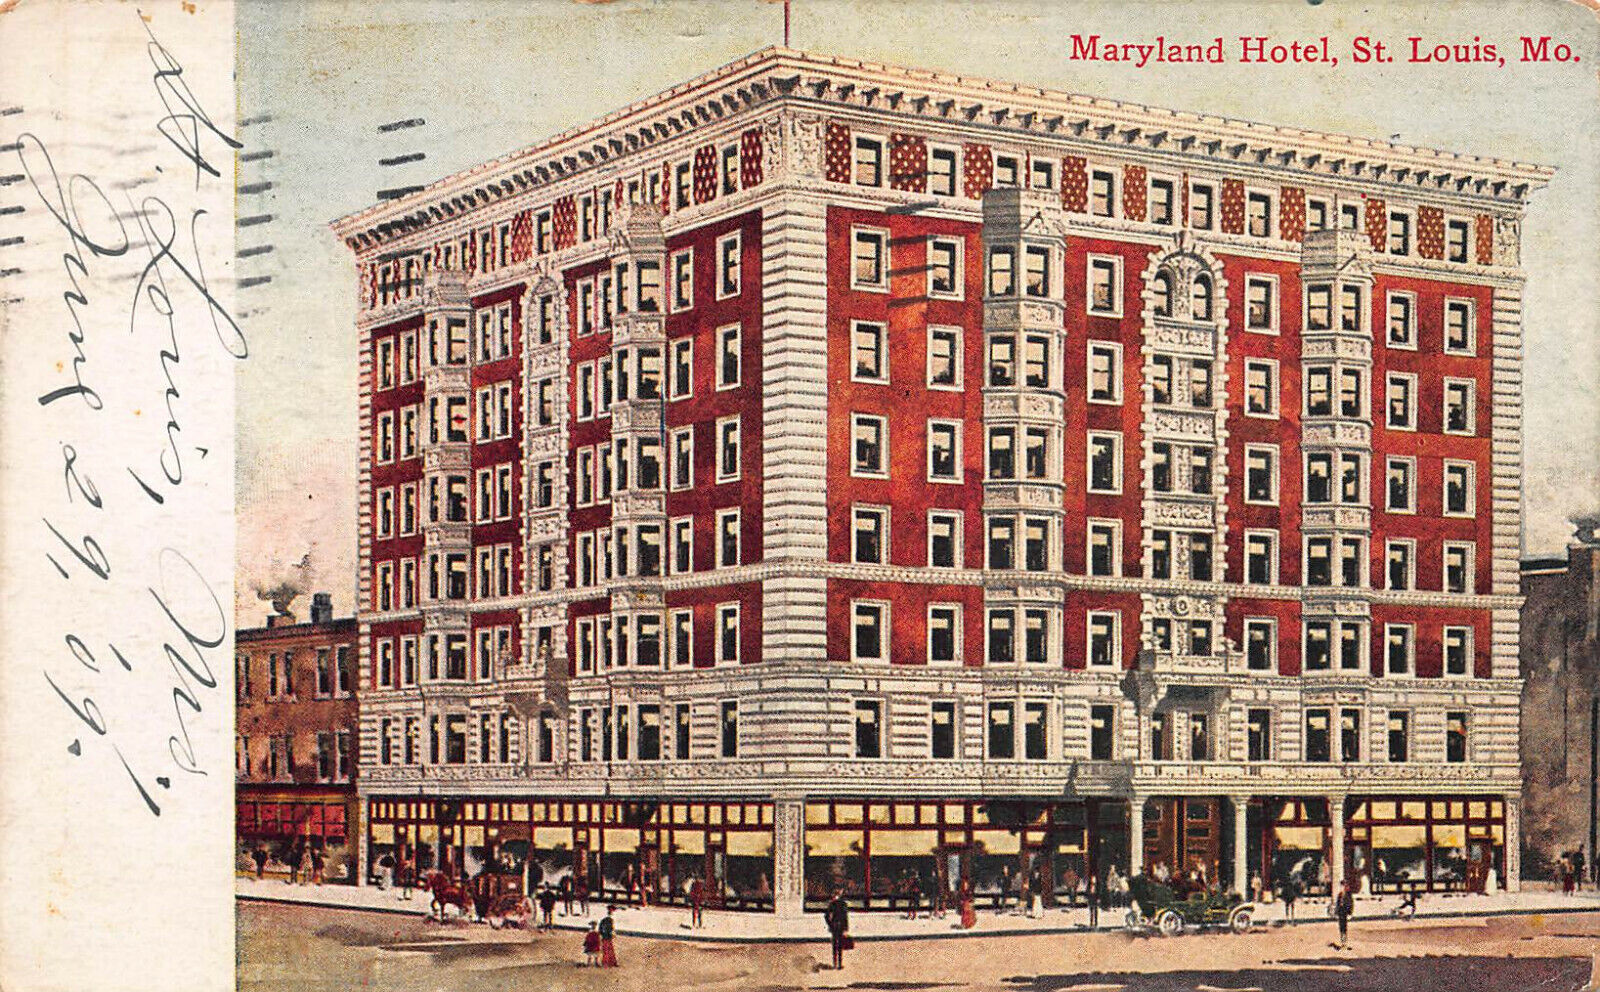 Maryland Hotel, St. Louis, Missouri, Early Postcard, Used in 1909